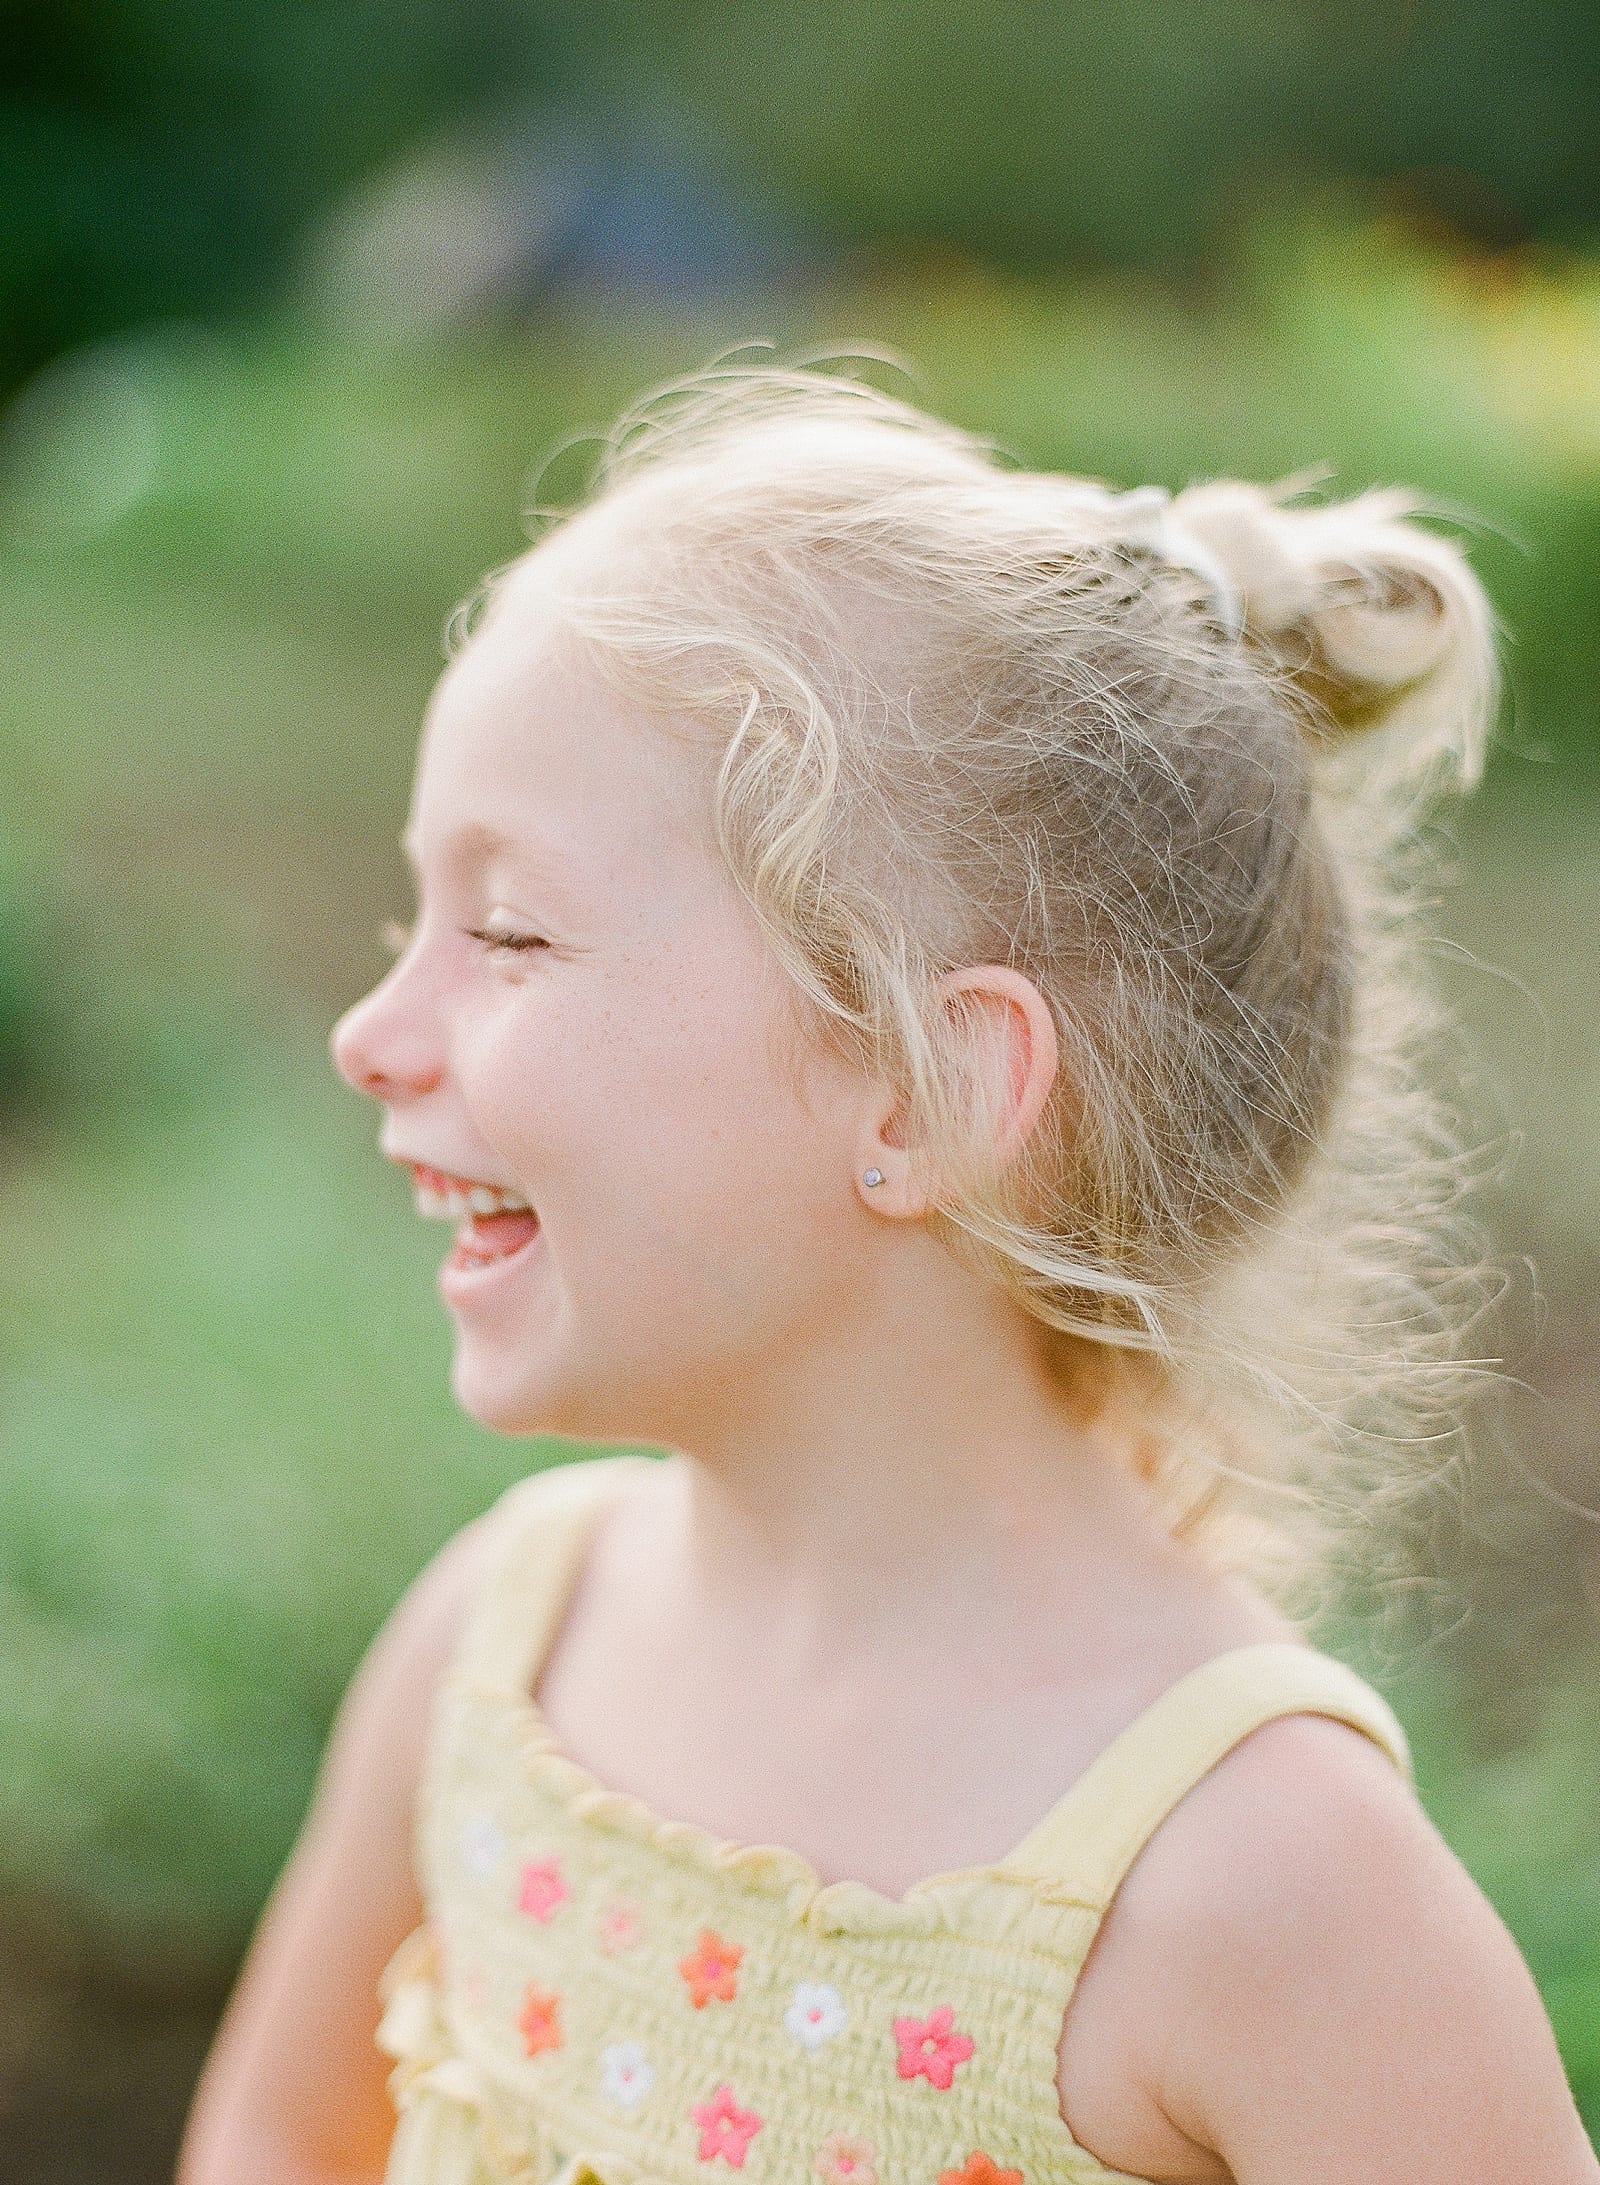 Little Girl Laughing Photo